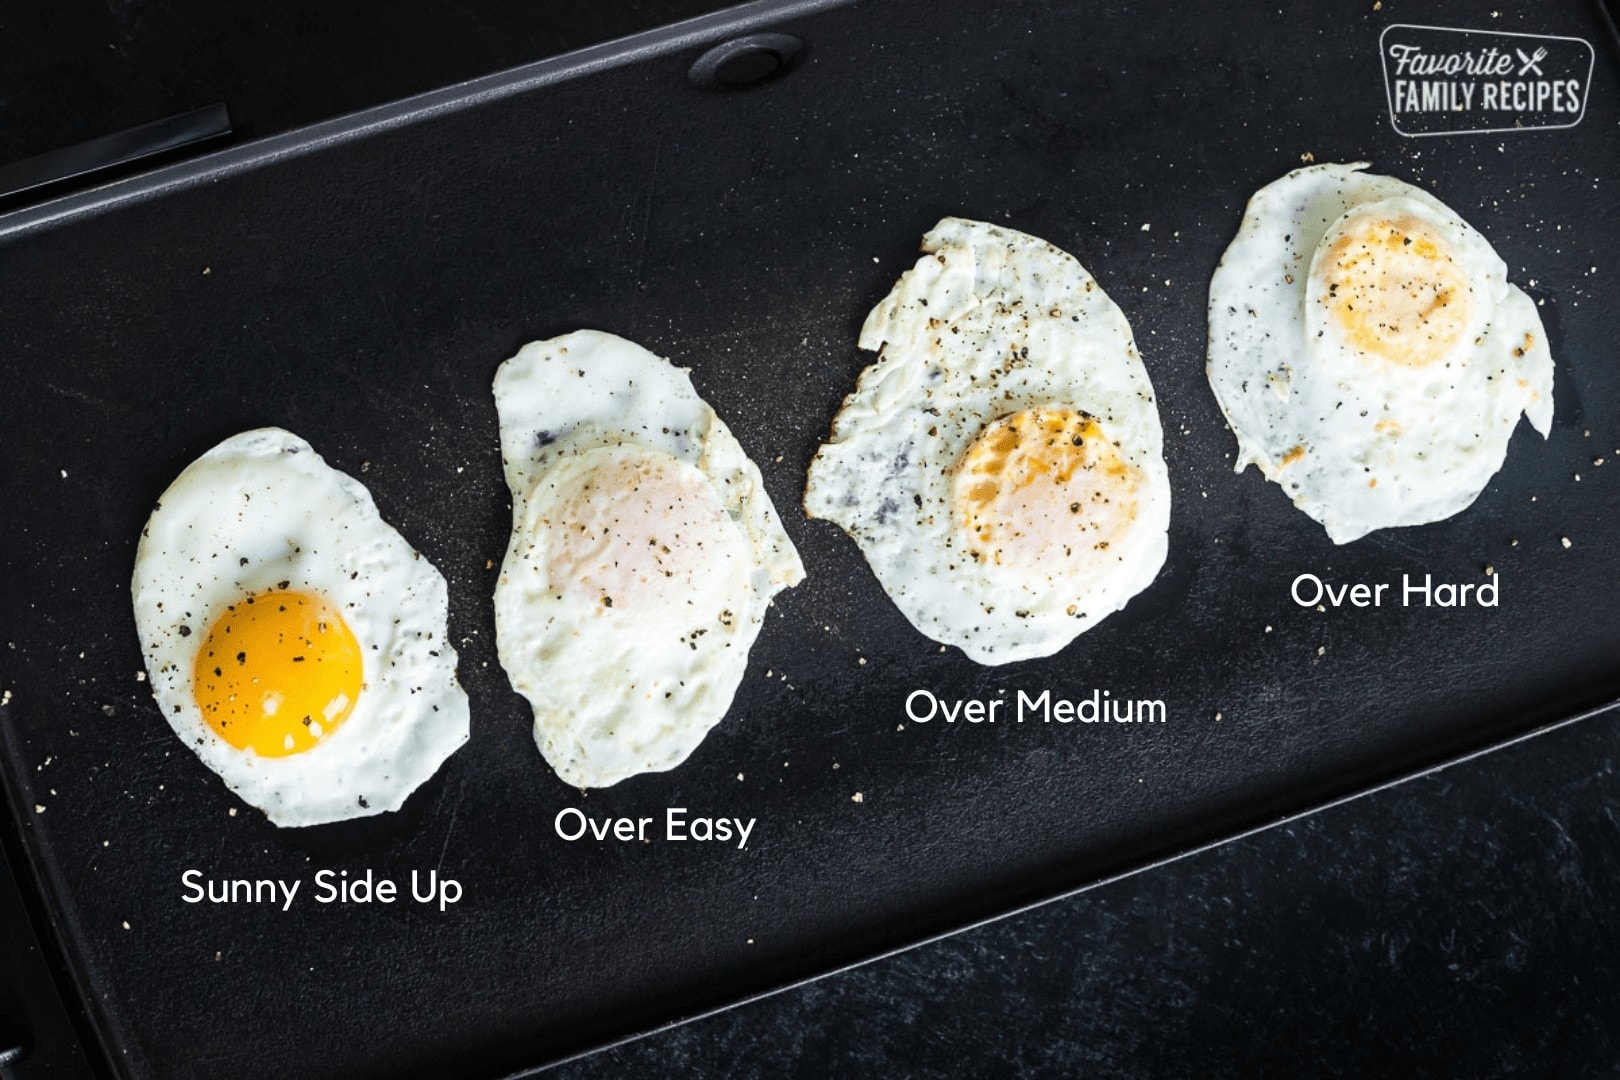 Different Ways To Cook Eggs: 5 Basics